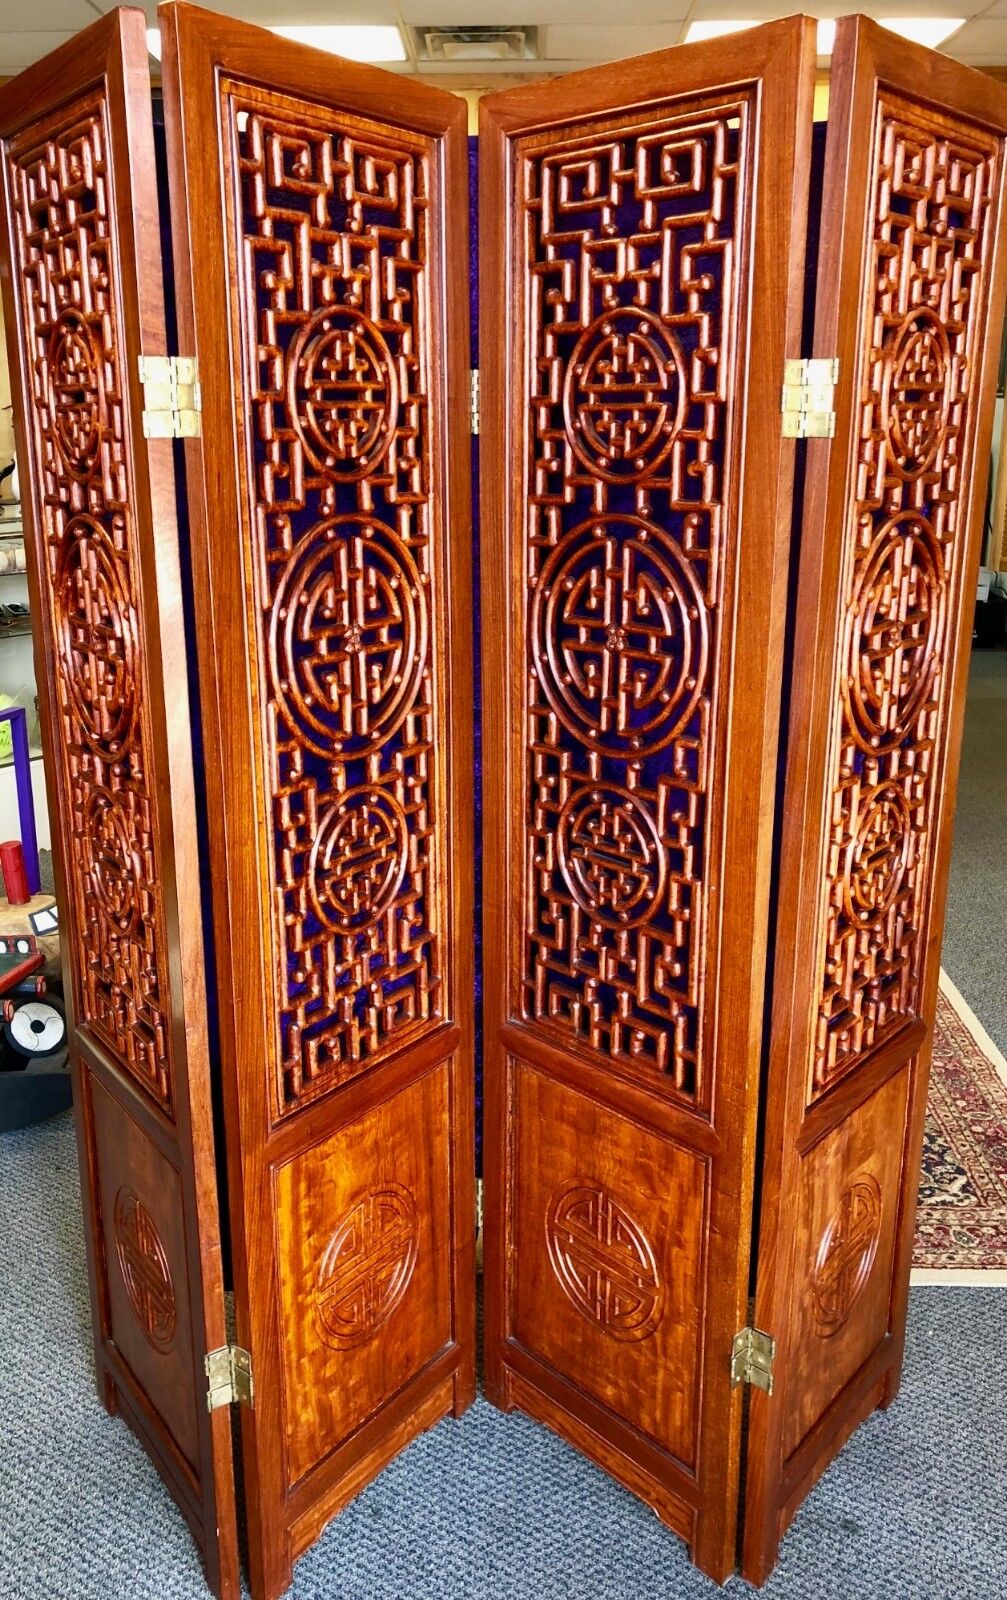 Antique Chinese Qing Dynasty Teak 4-Panel Floor Screen – 6ft! Handmade Does Not Apply